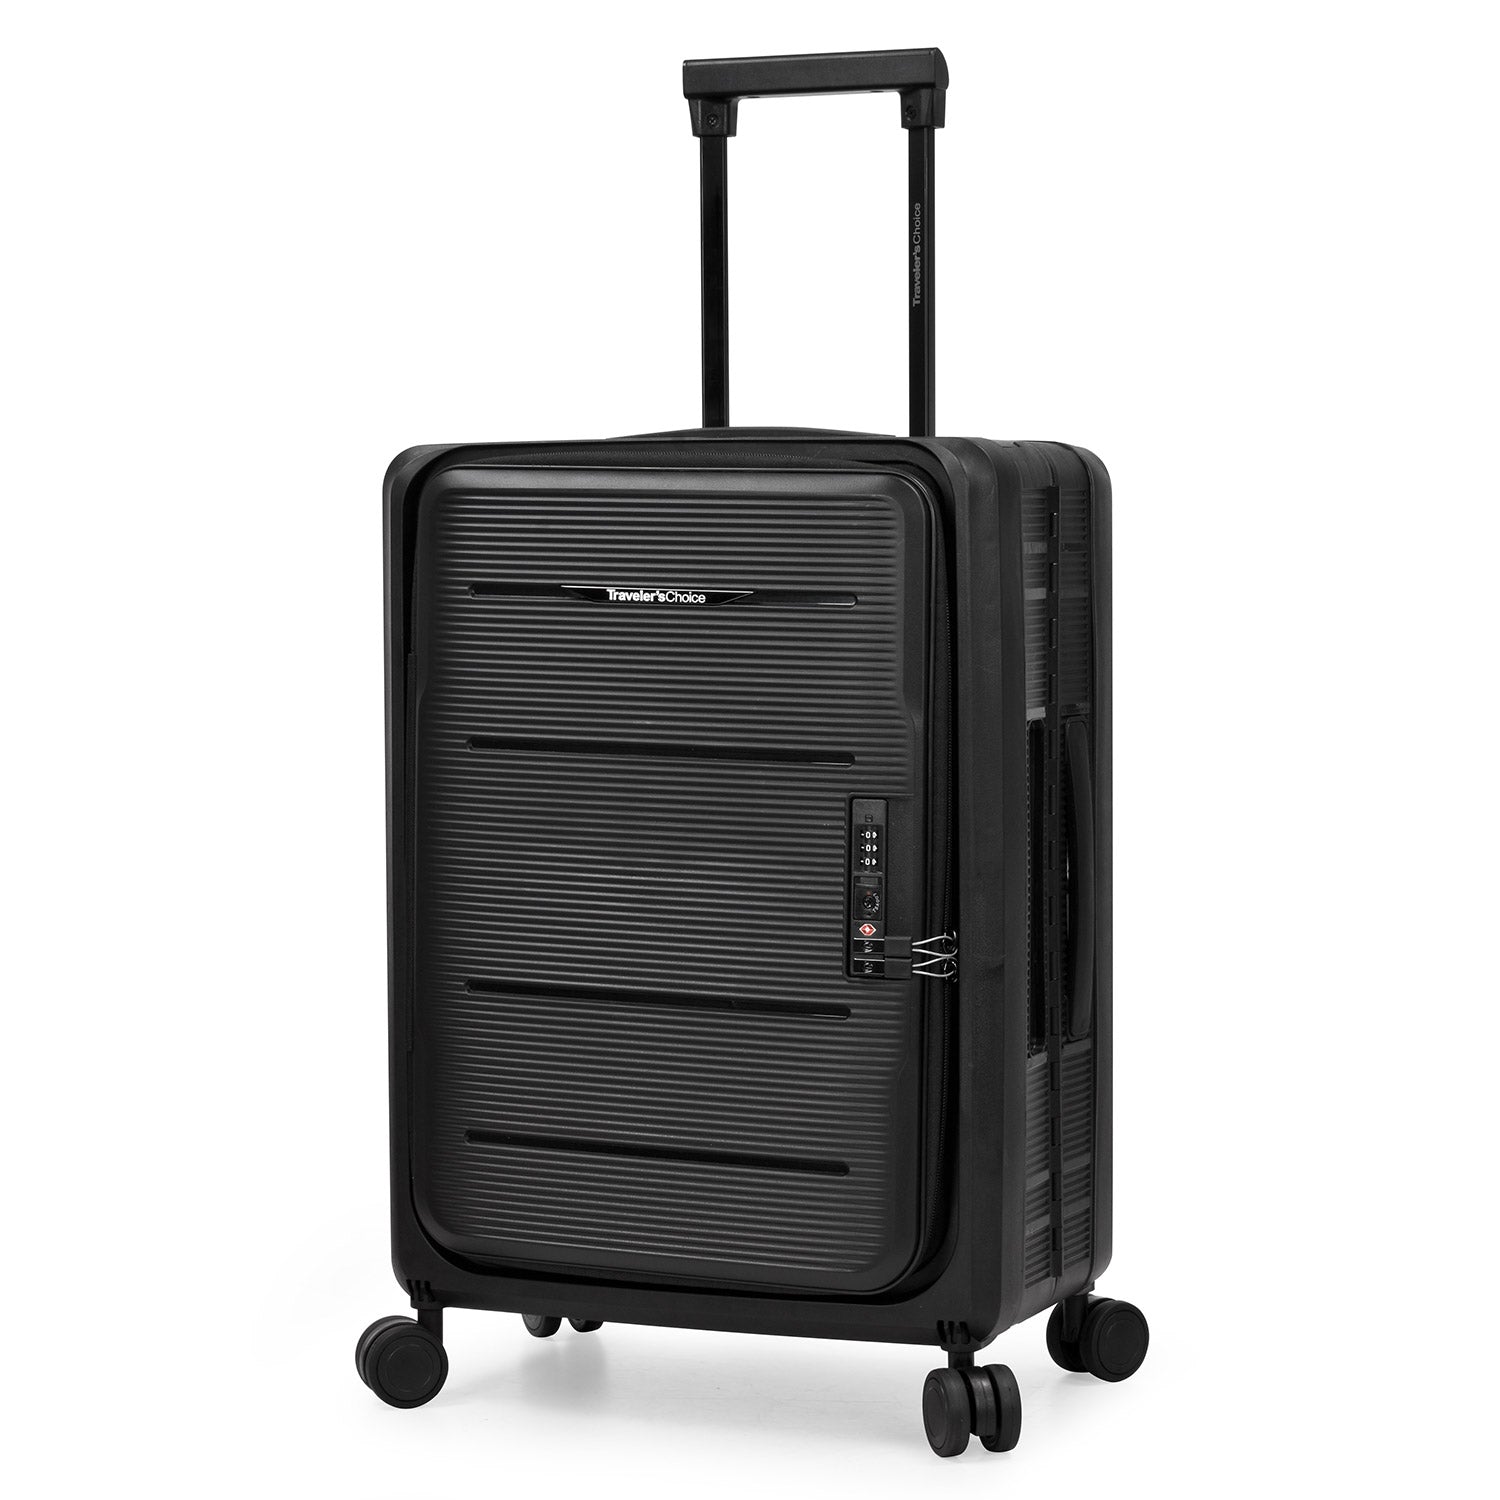 The Collapsible Carry-On Spinner Luggage